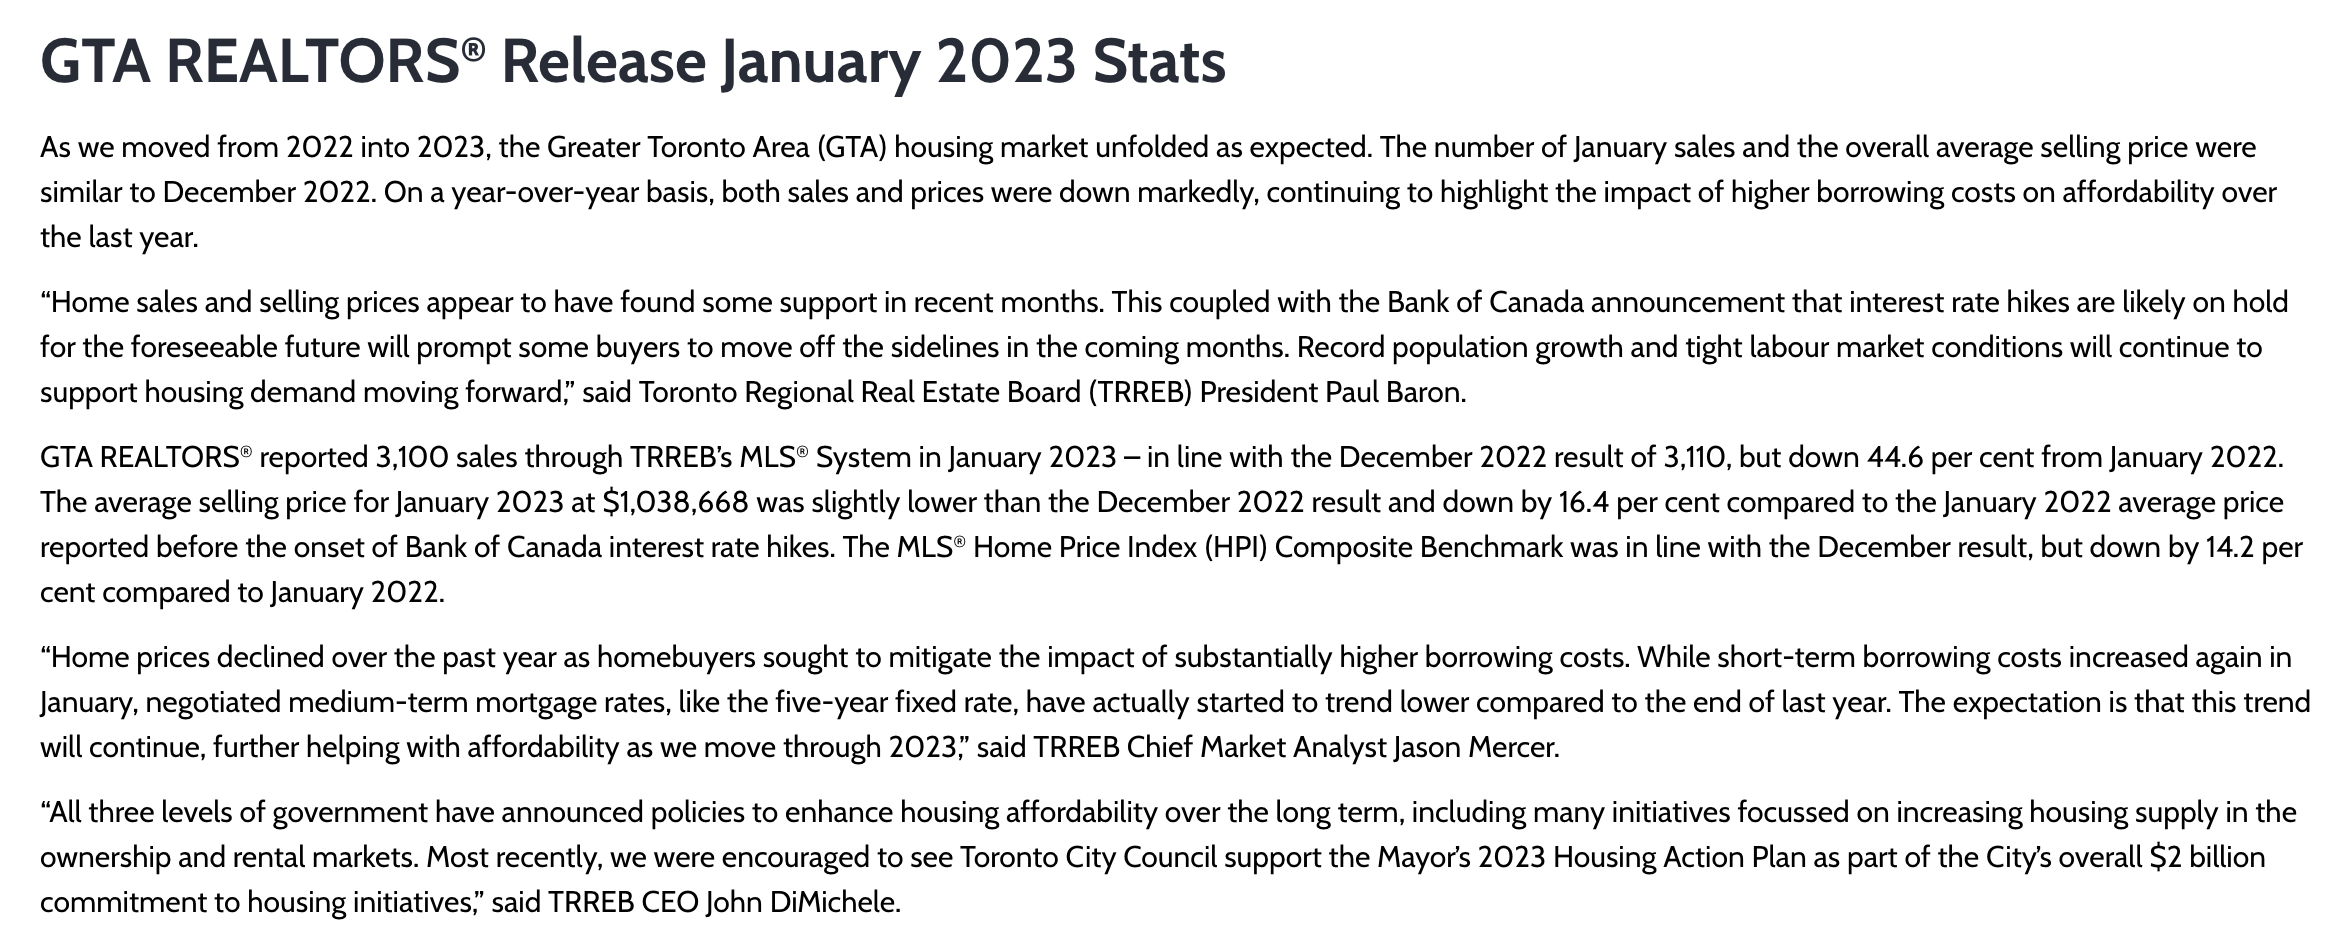 From the Toronto Regional Real Estate Board Market Watch January 2023